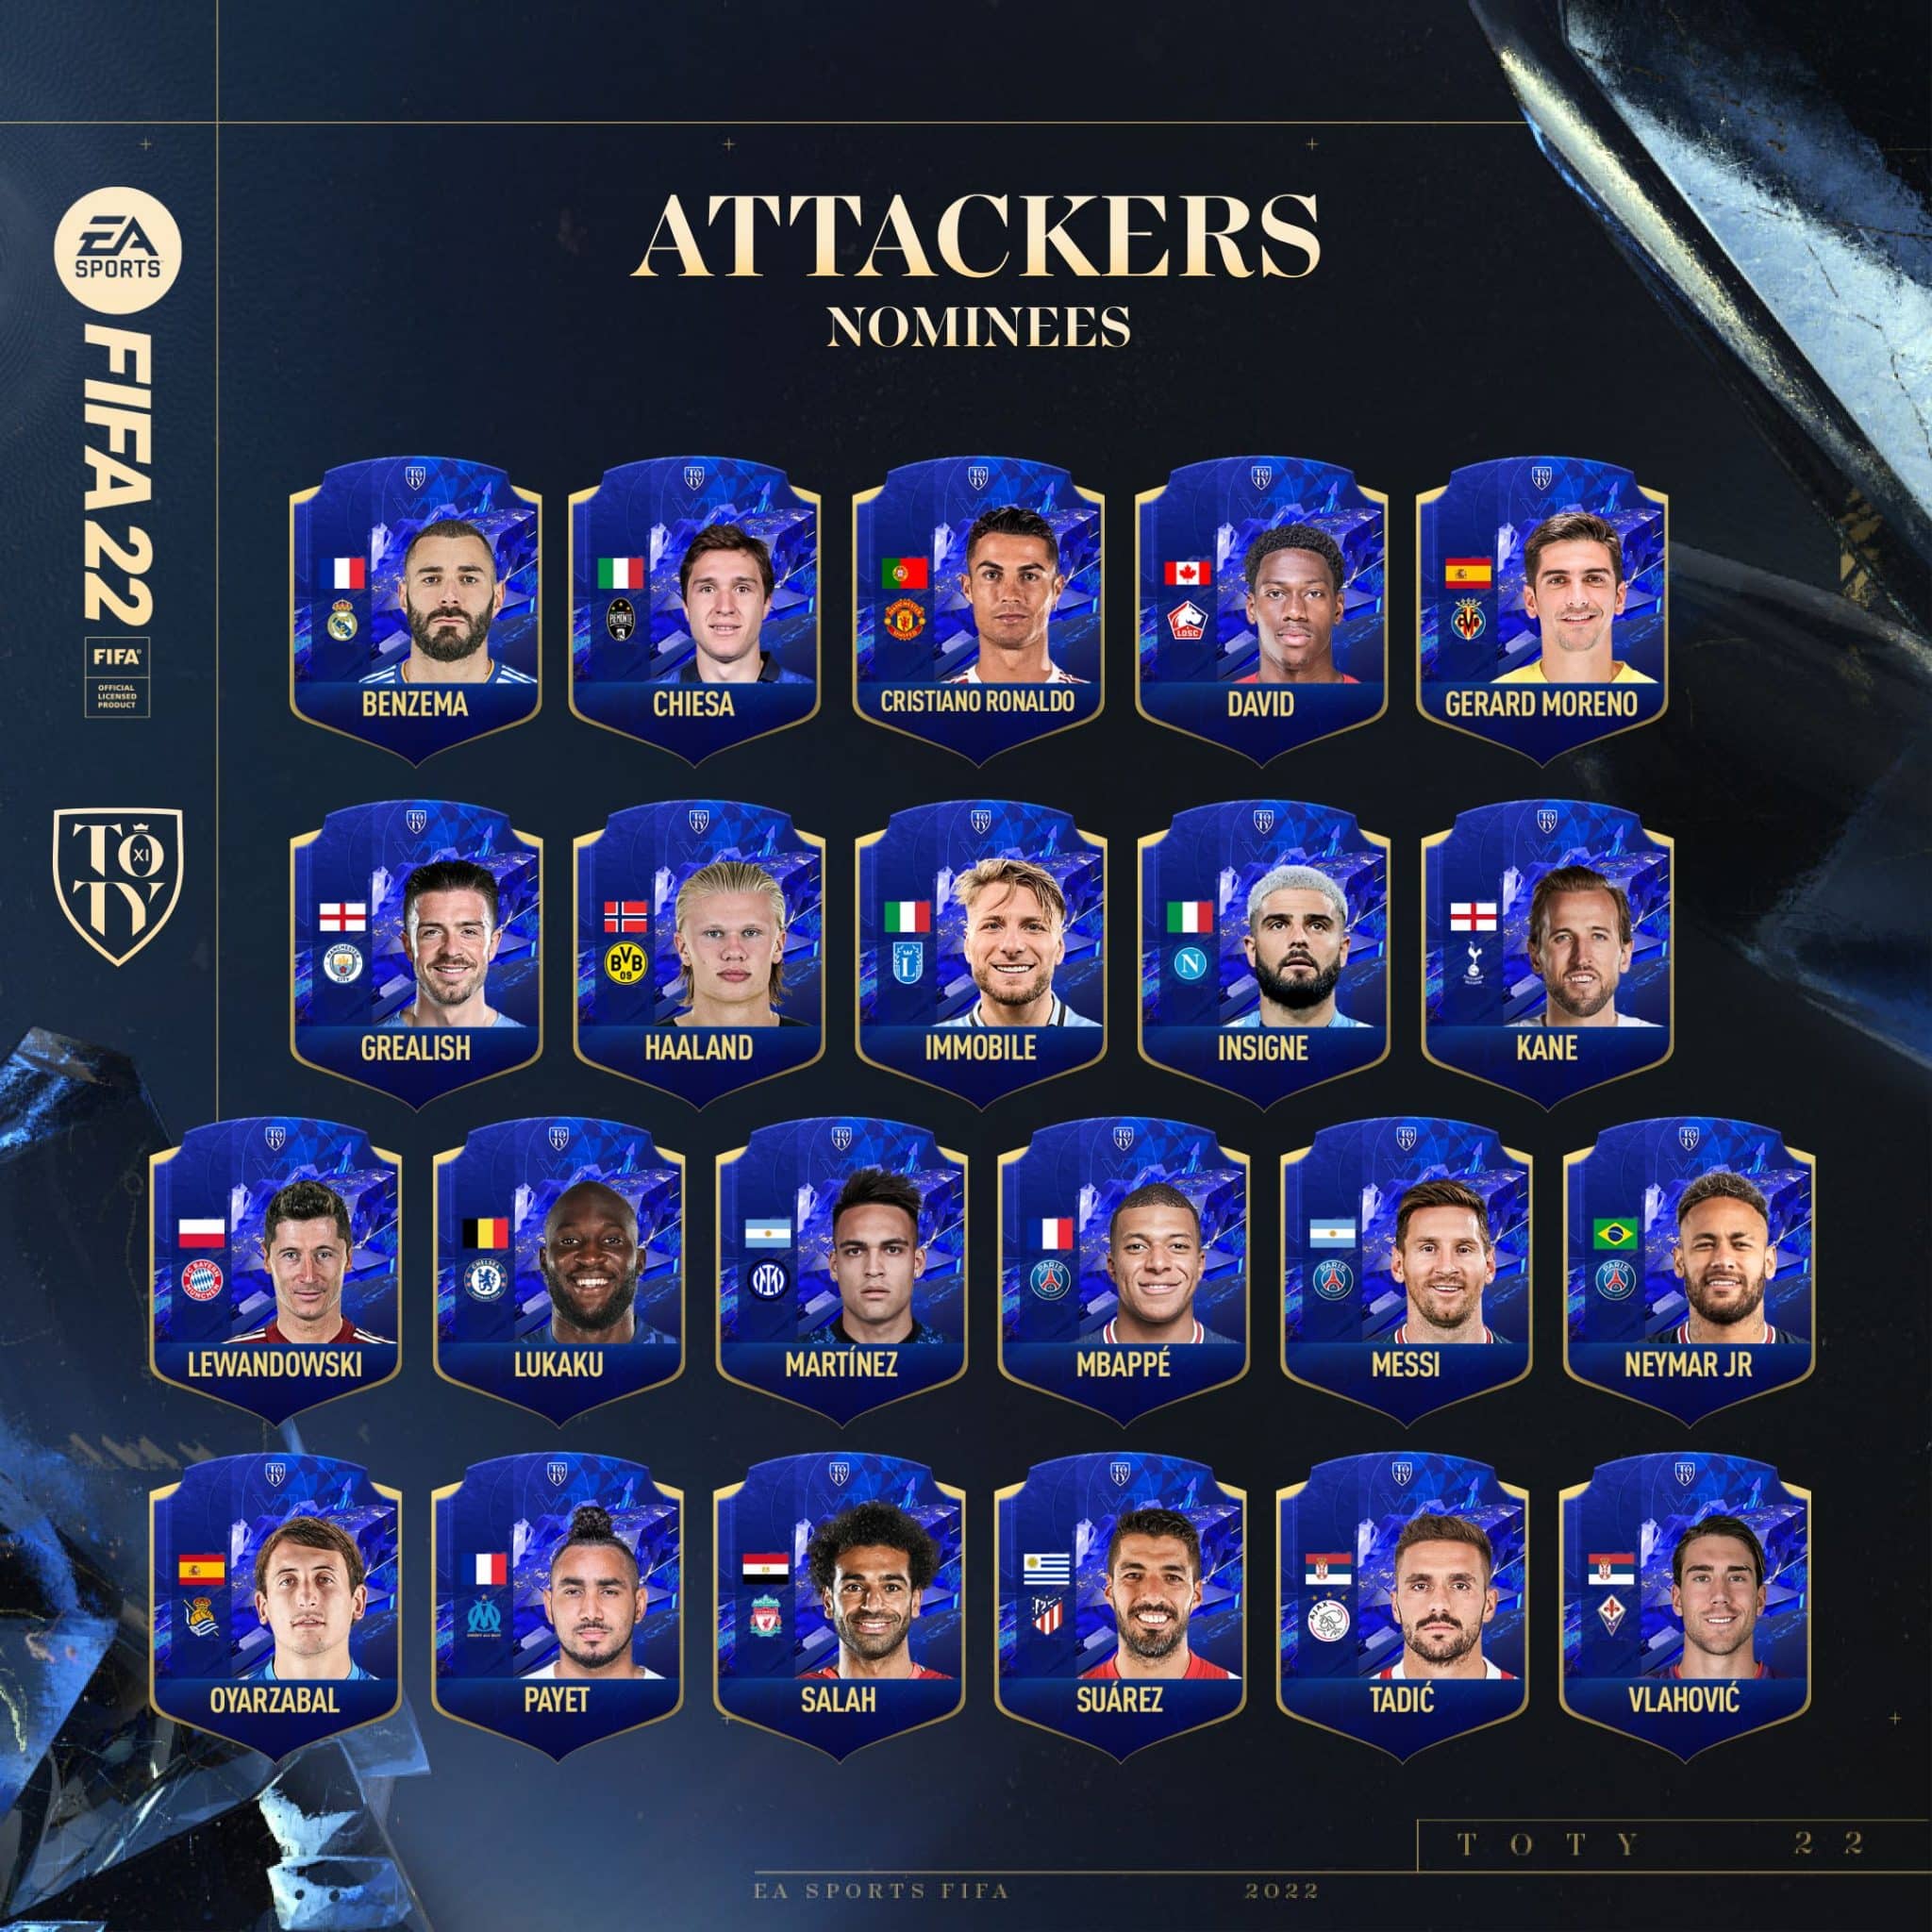 attackers toty nominees